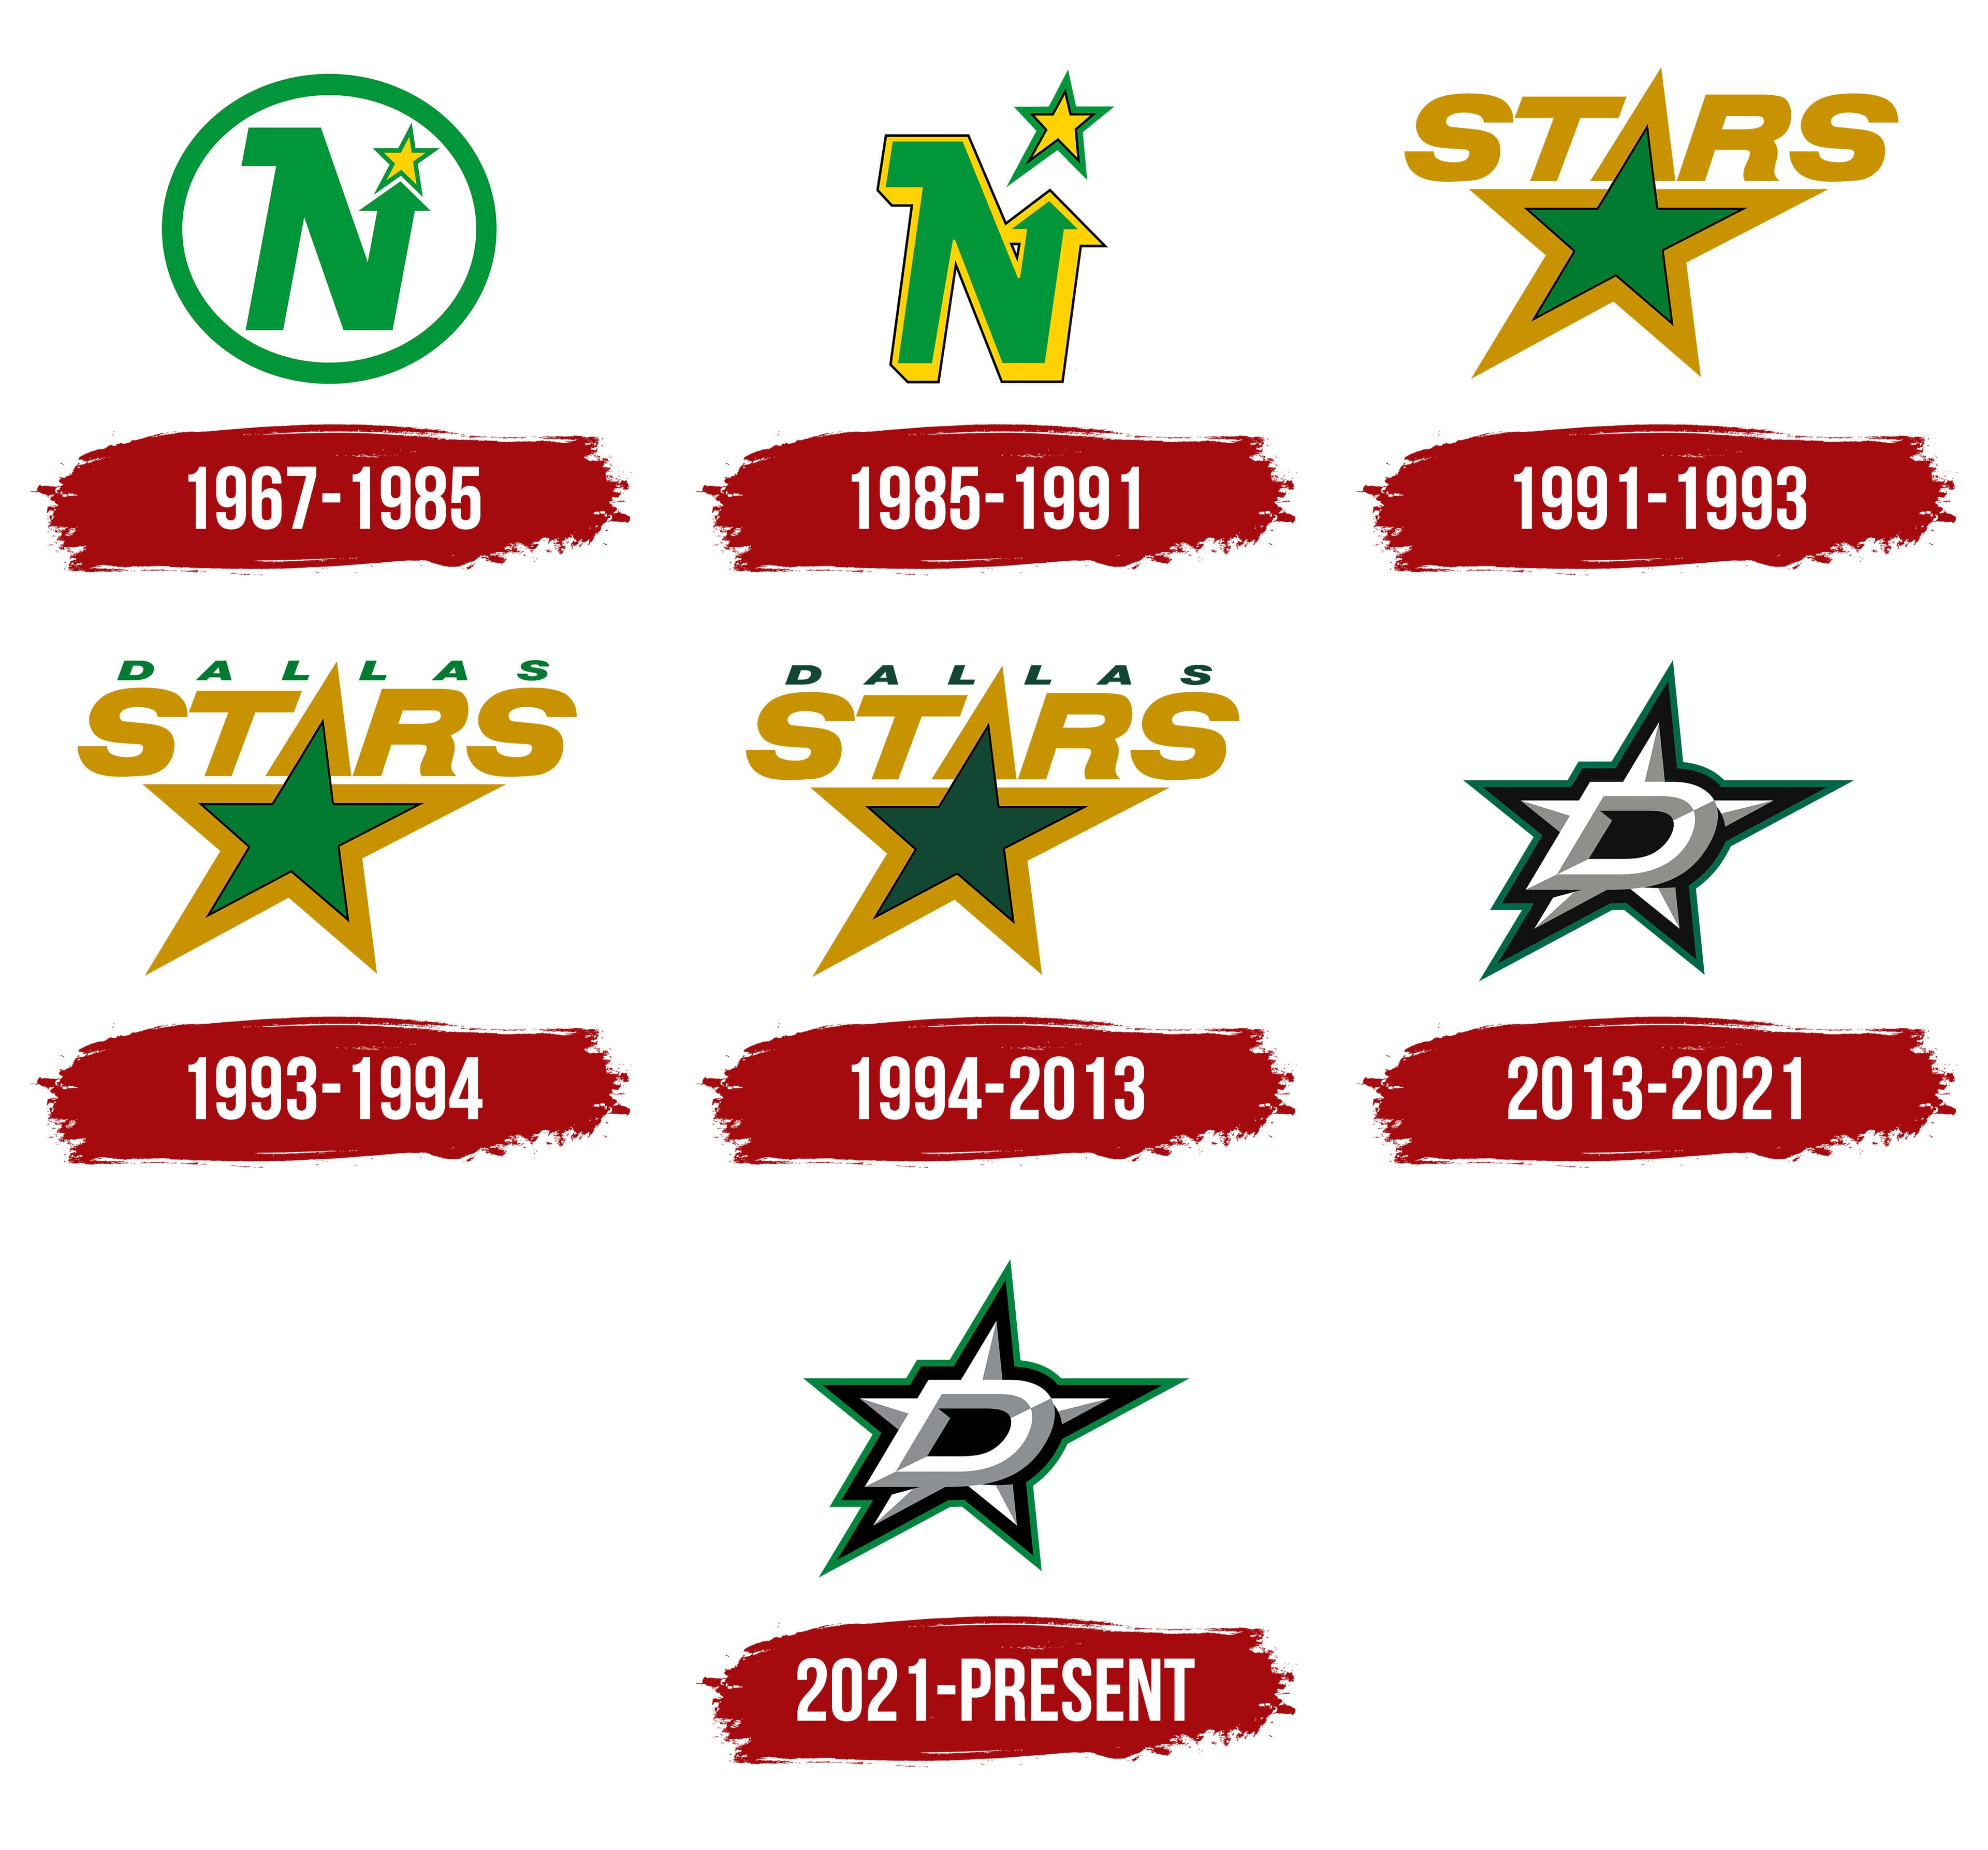 Dallas Stars Redesign, thoughts? Should they bring back the old logo?